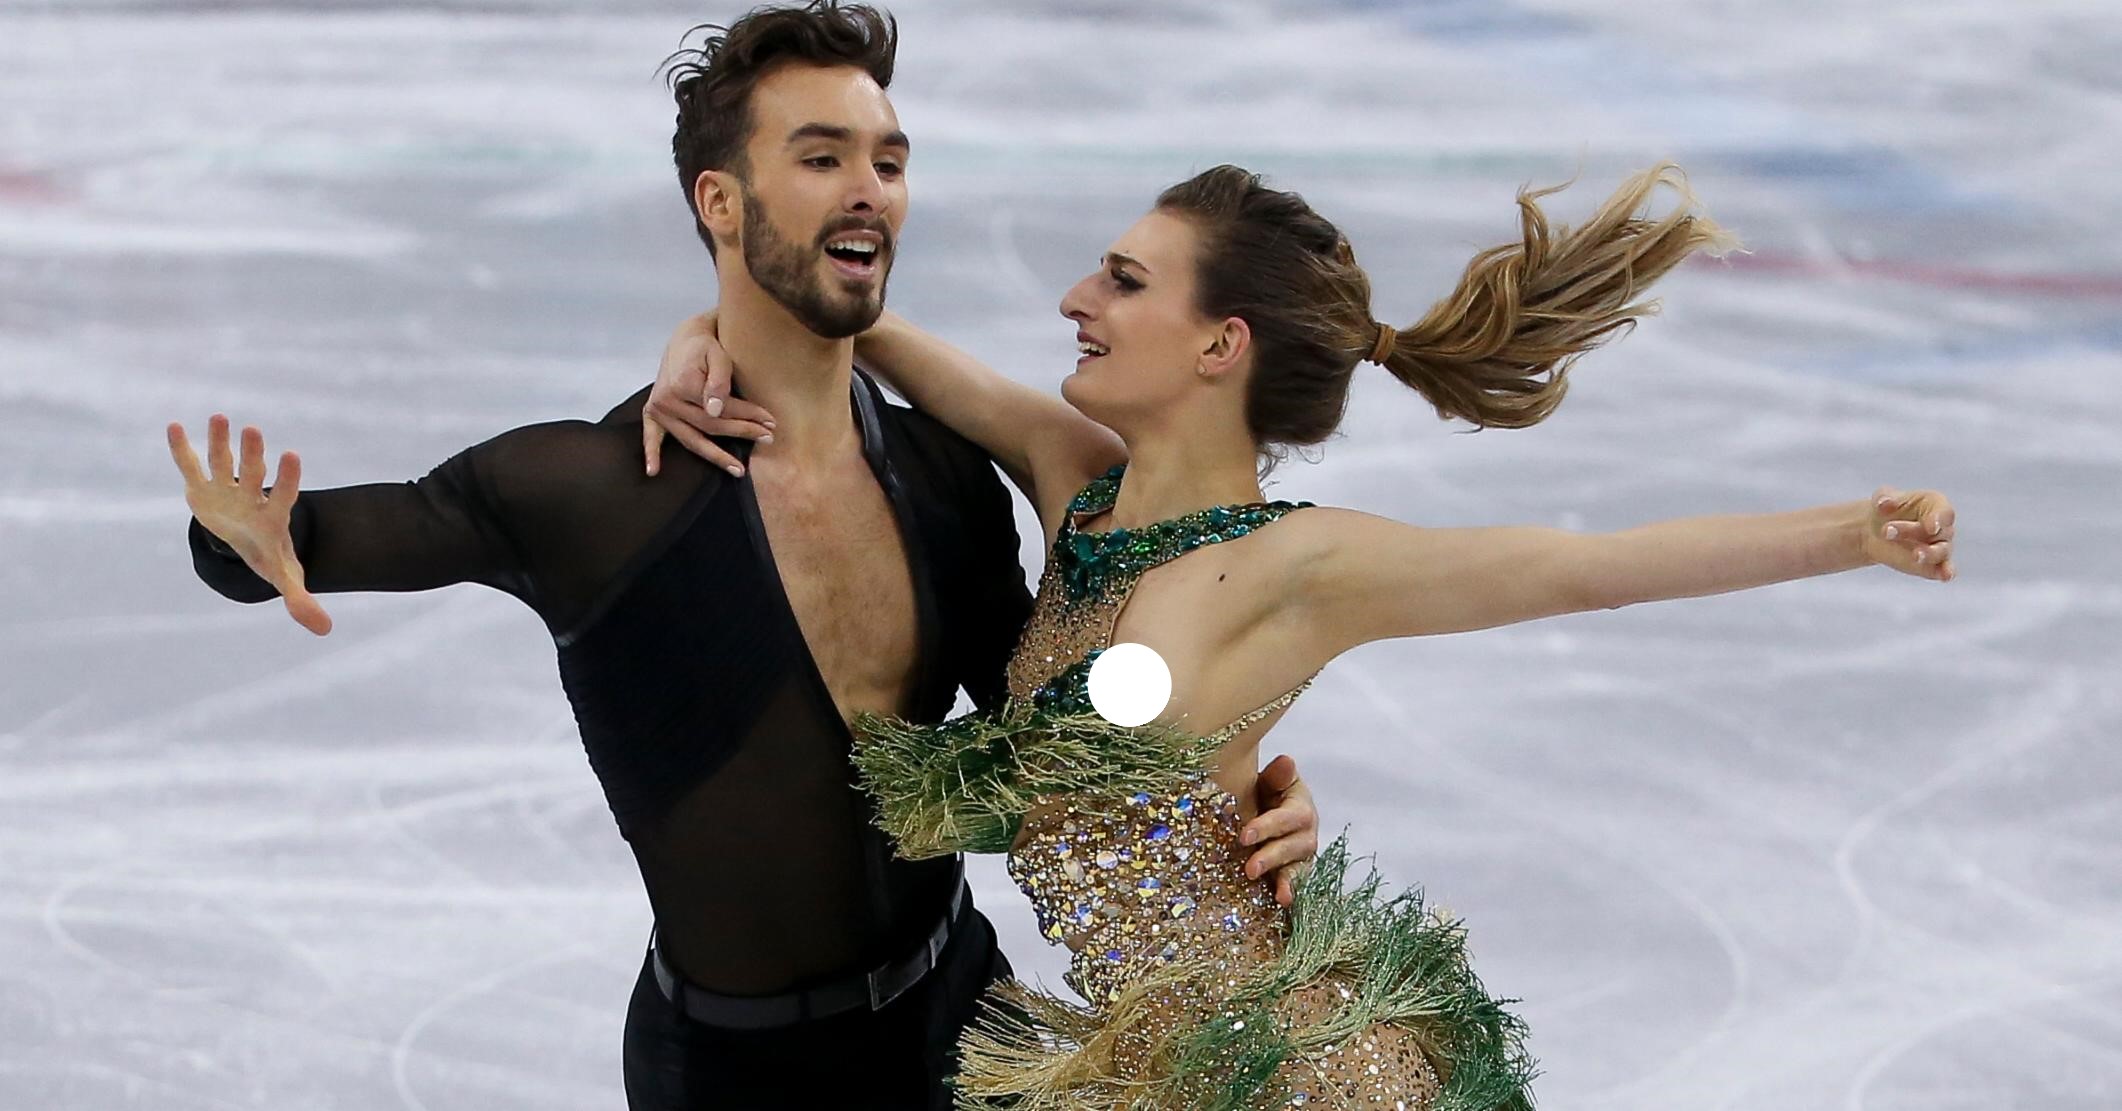 A French Figure Skater Had an Unfortunate Nip Slip During Her